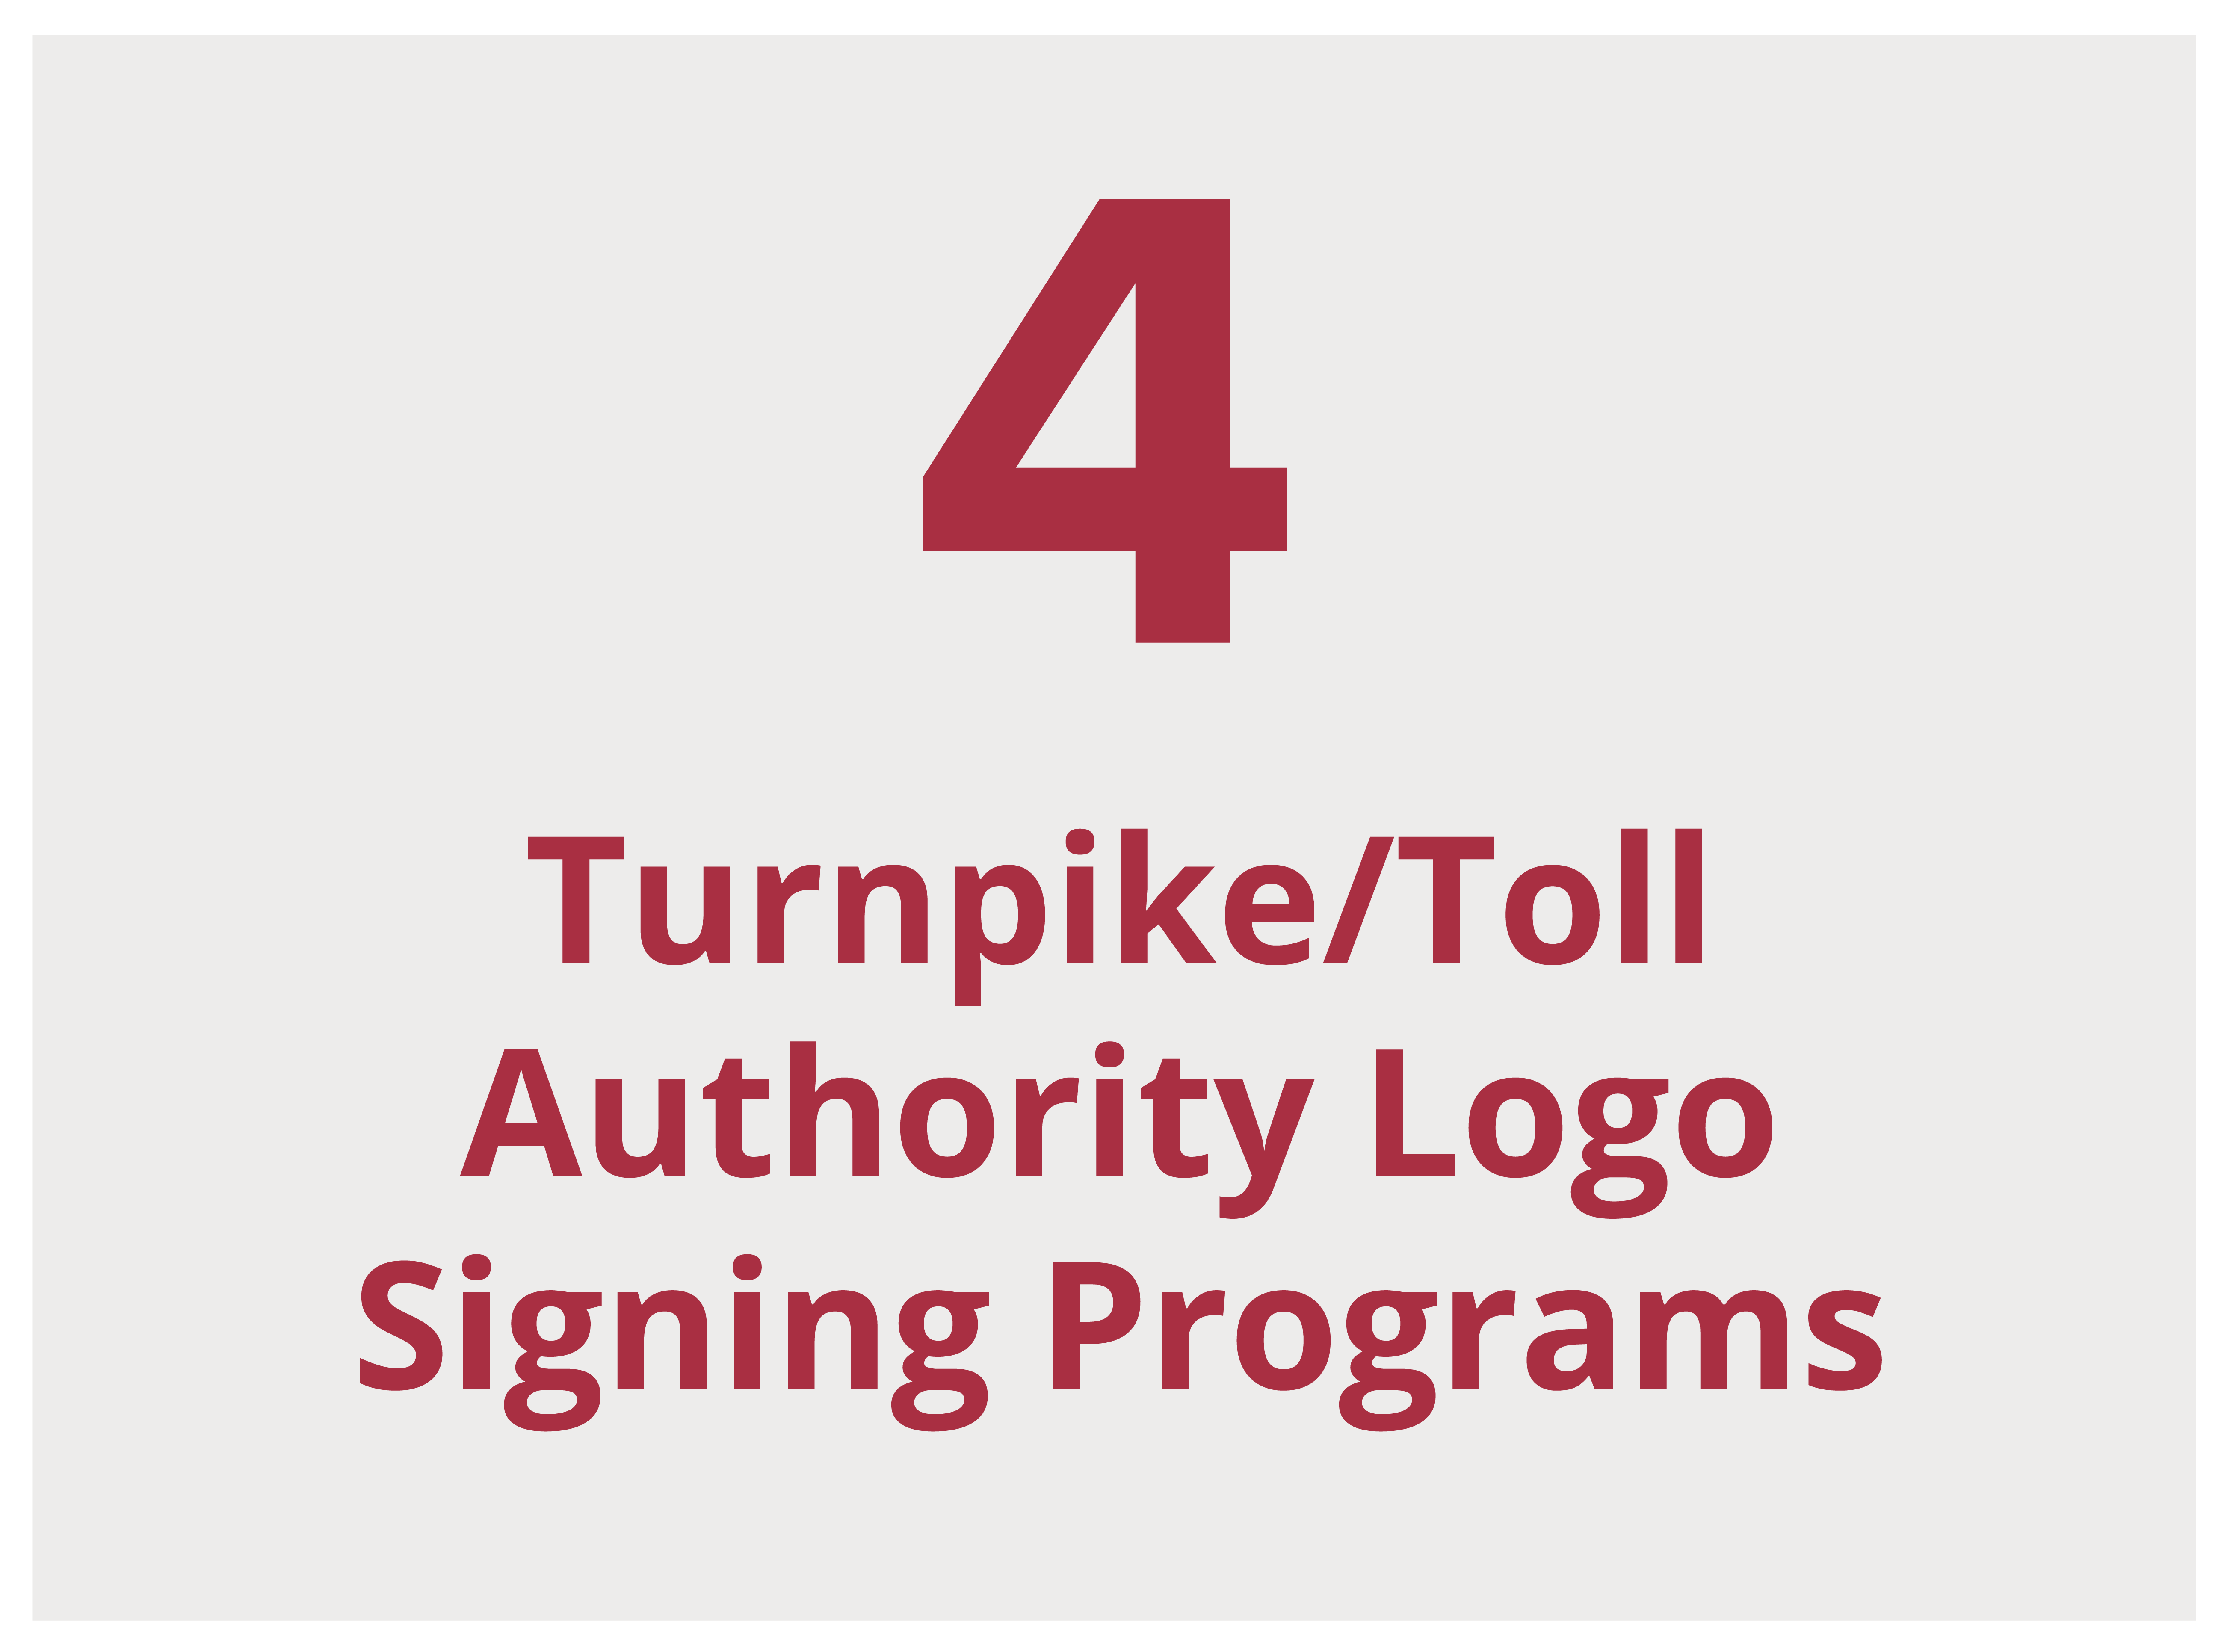 4 Turnpike/Toll Authority Logos Signing Programs